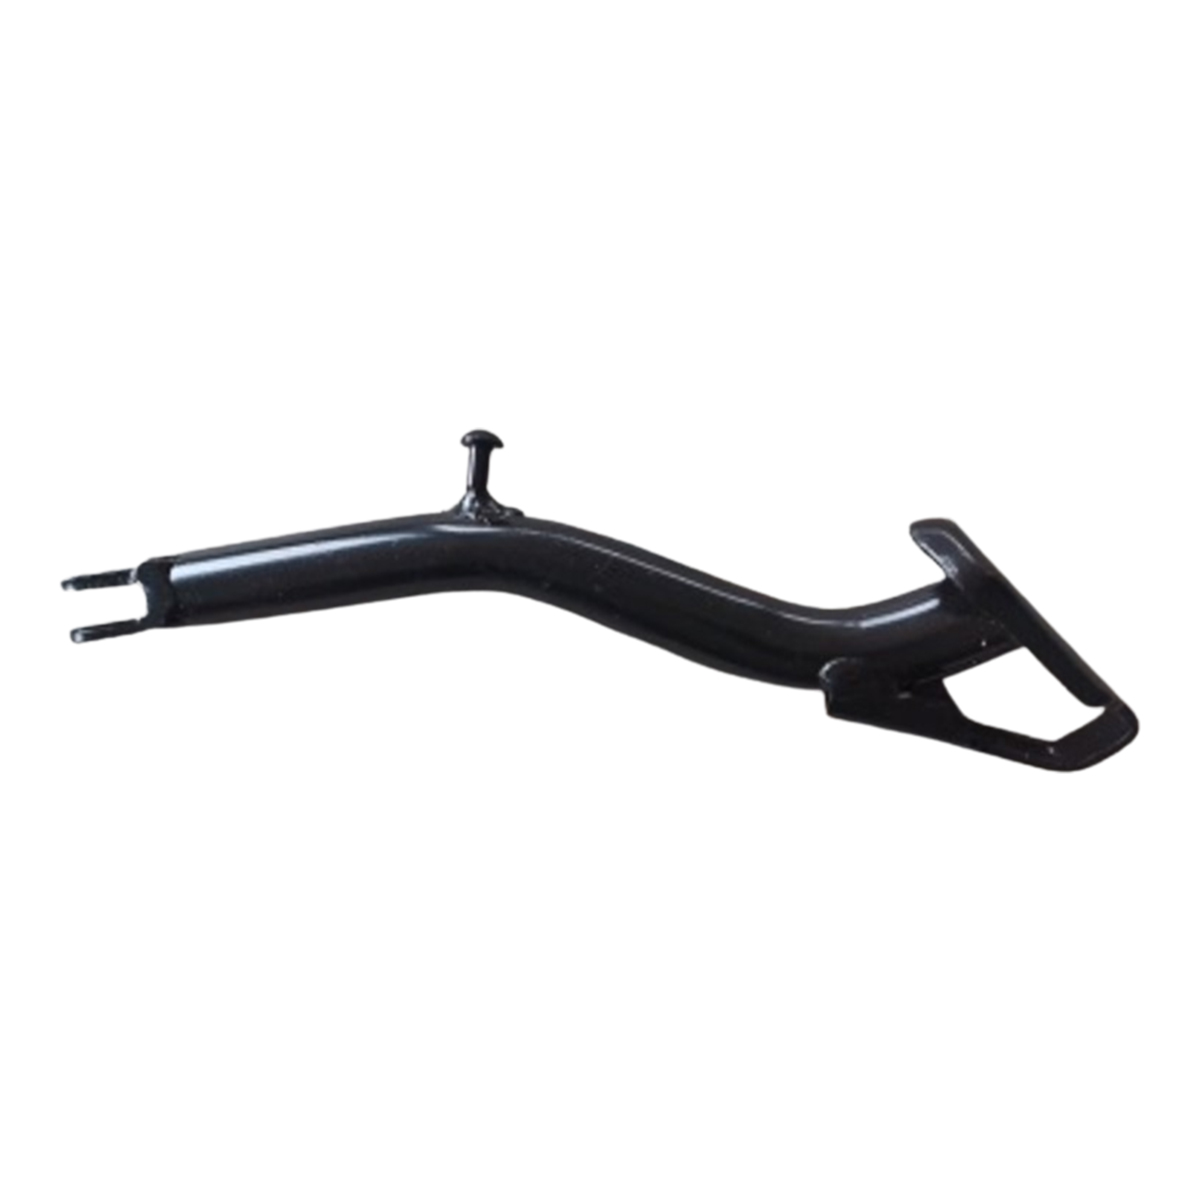 DAYI SIDE SUPPORT FOR DAYI E ODIN 10kw 6000W  E SCOOTER E ROLLER E SCOOTER SPARE PARTS